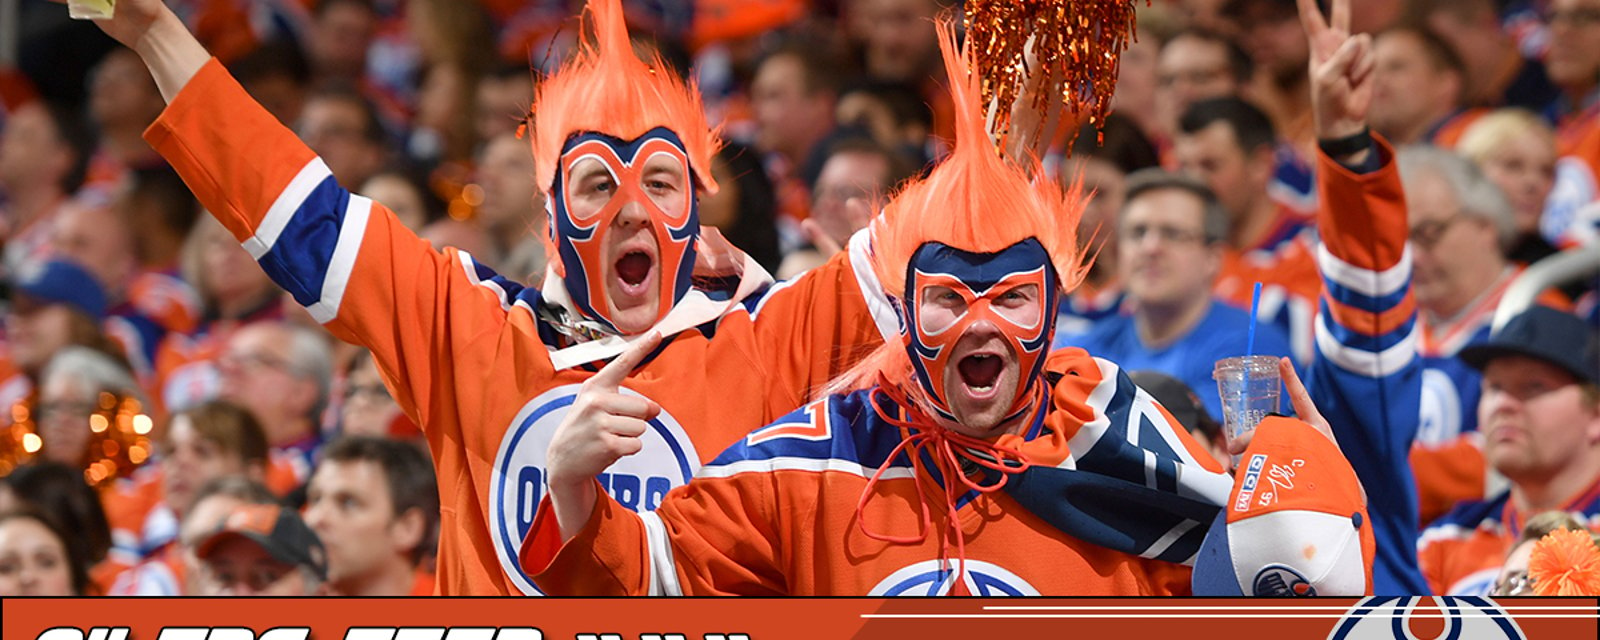 GOTTA SEE IT: Edmonton business launches HILARIOUS attack on NHL